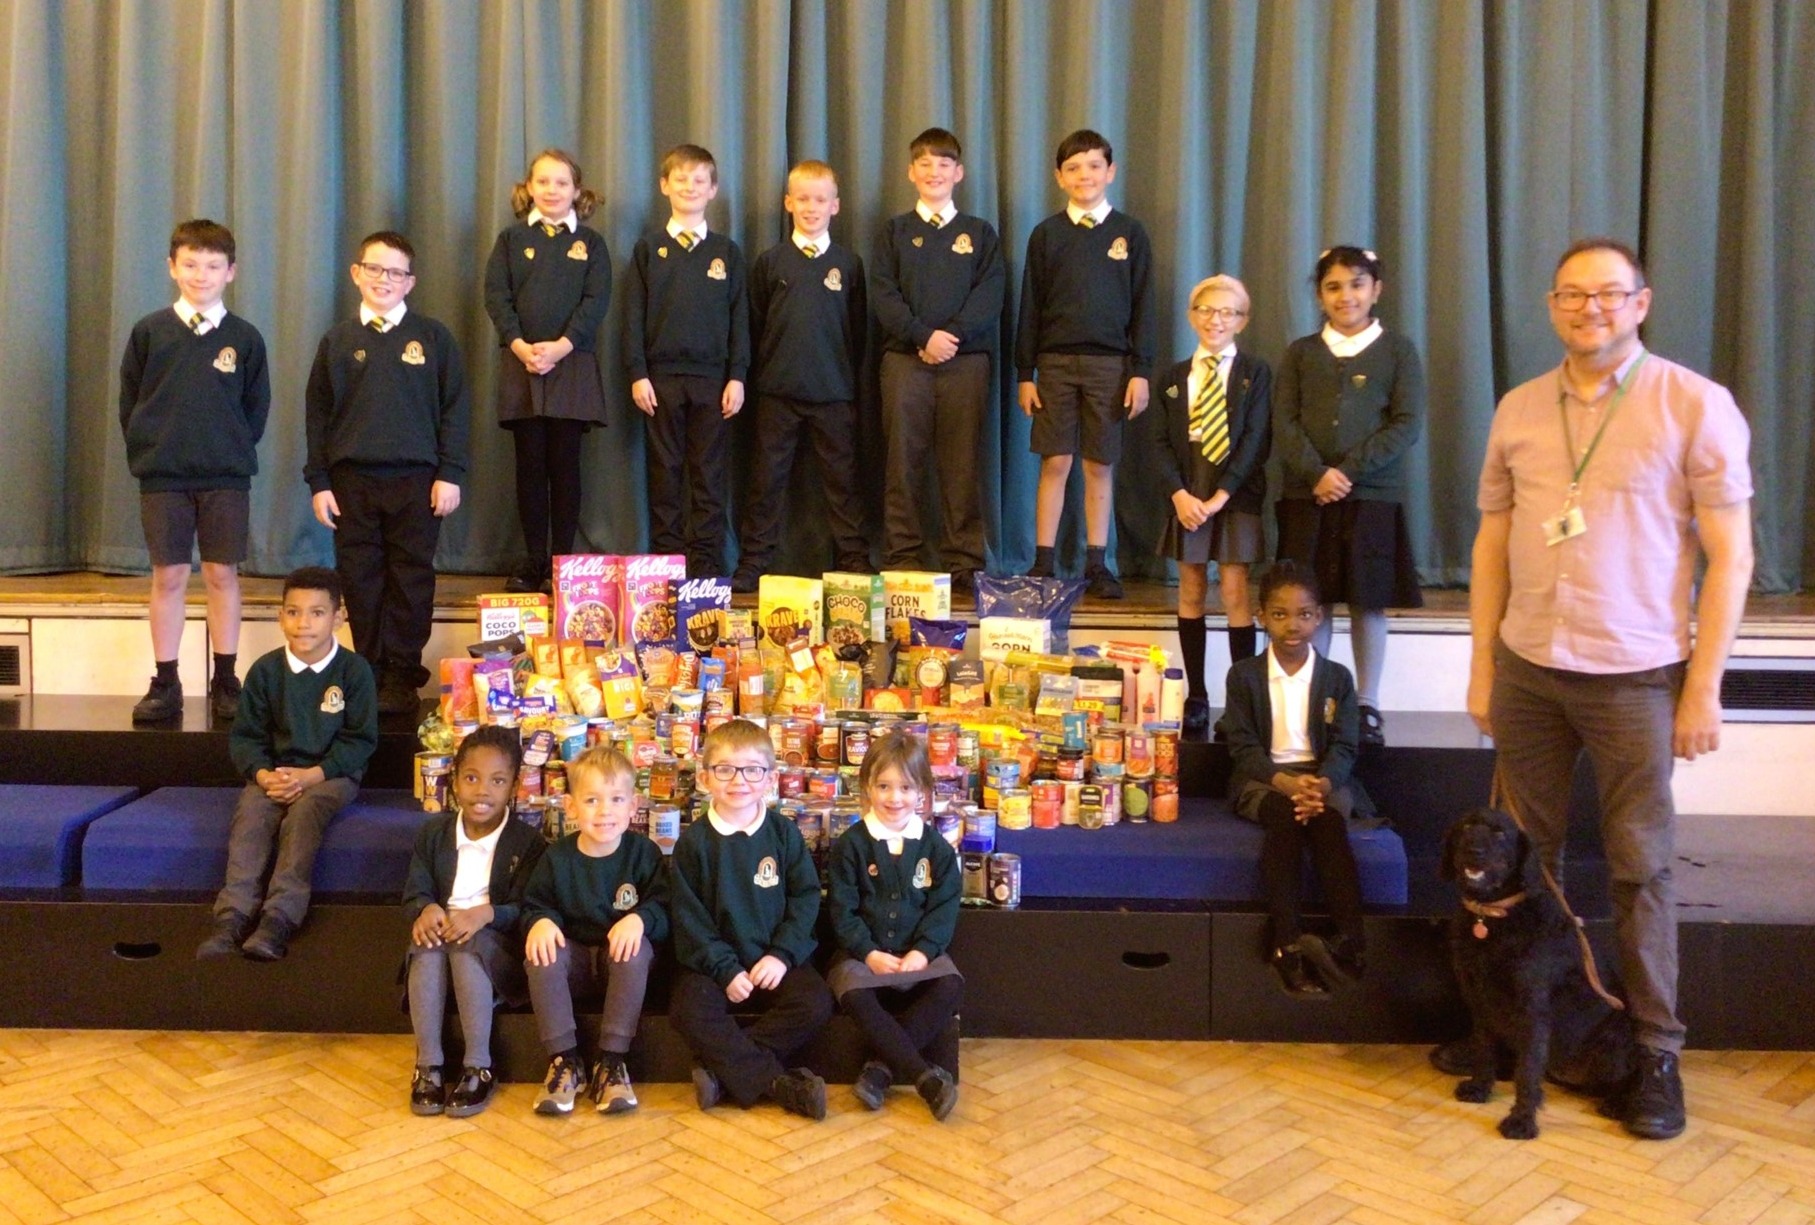 Harvest celebration collections at Acton Park Primary School.